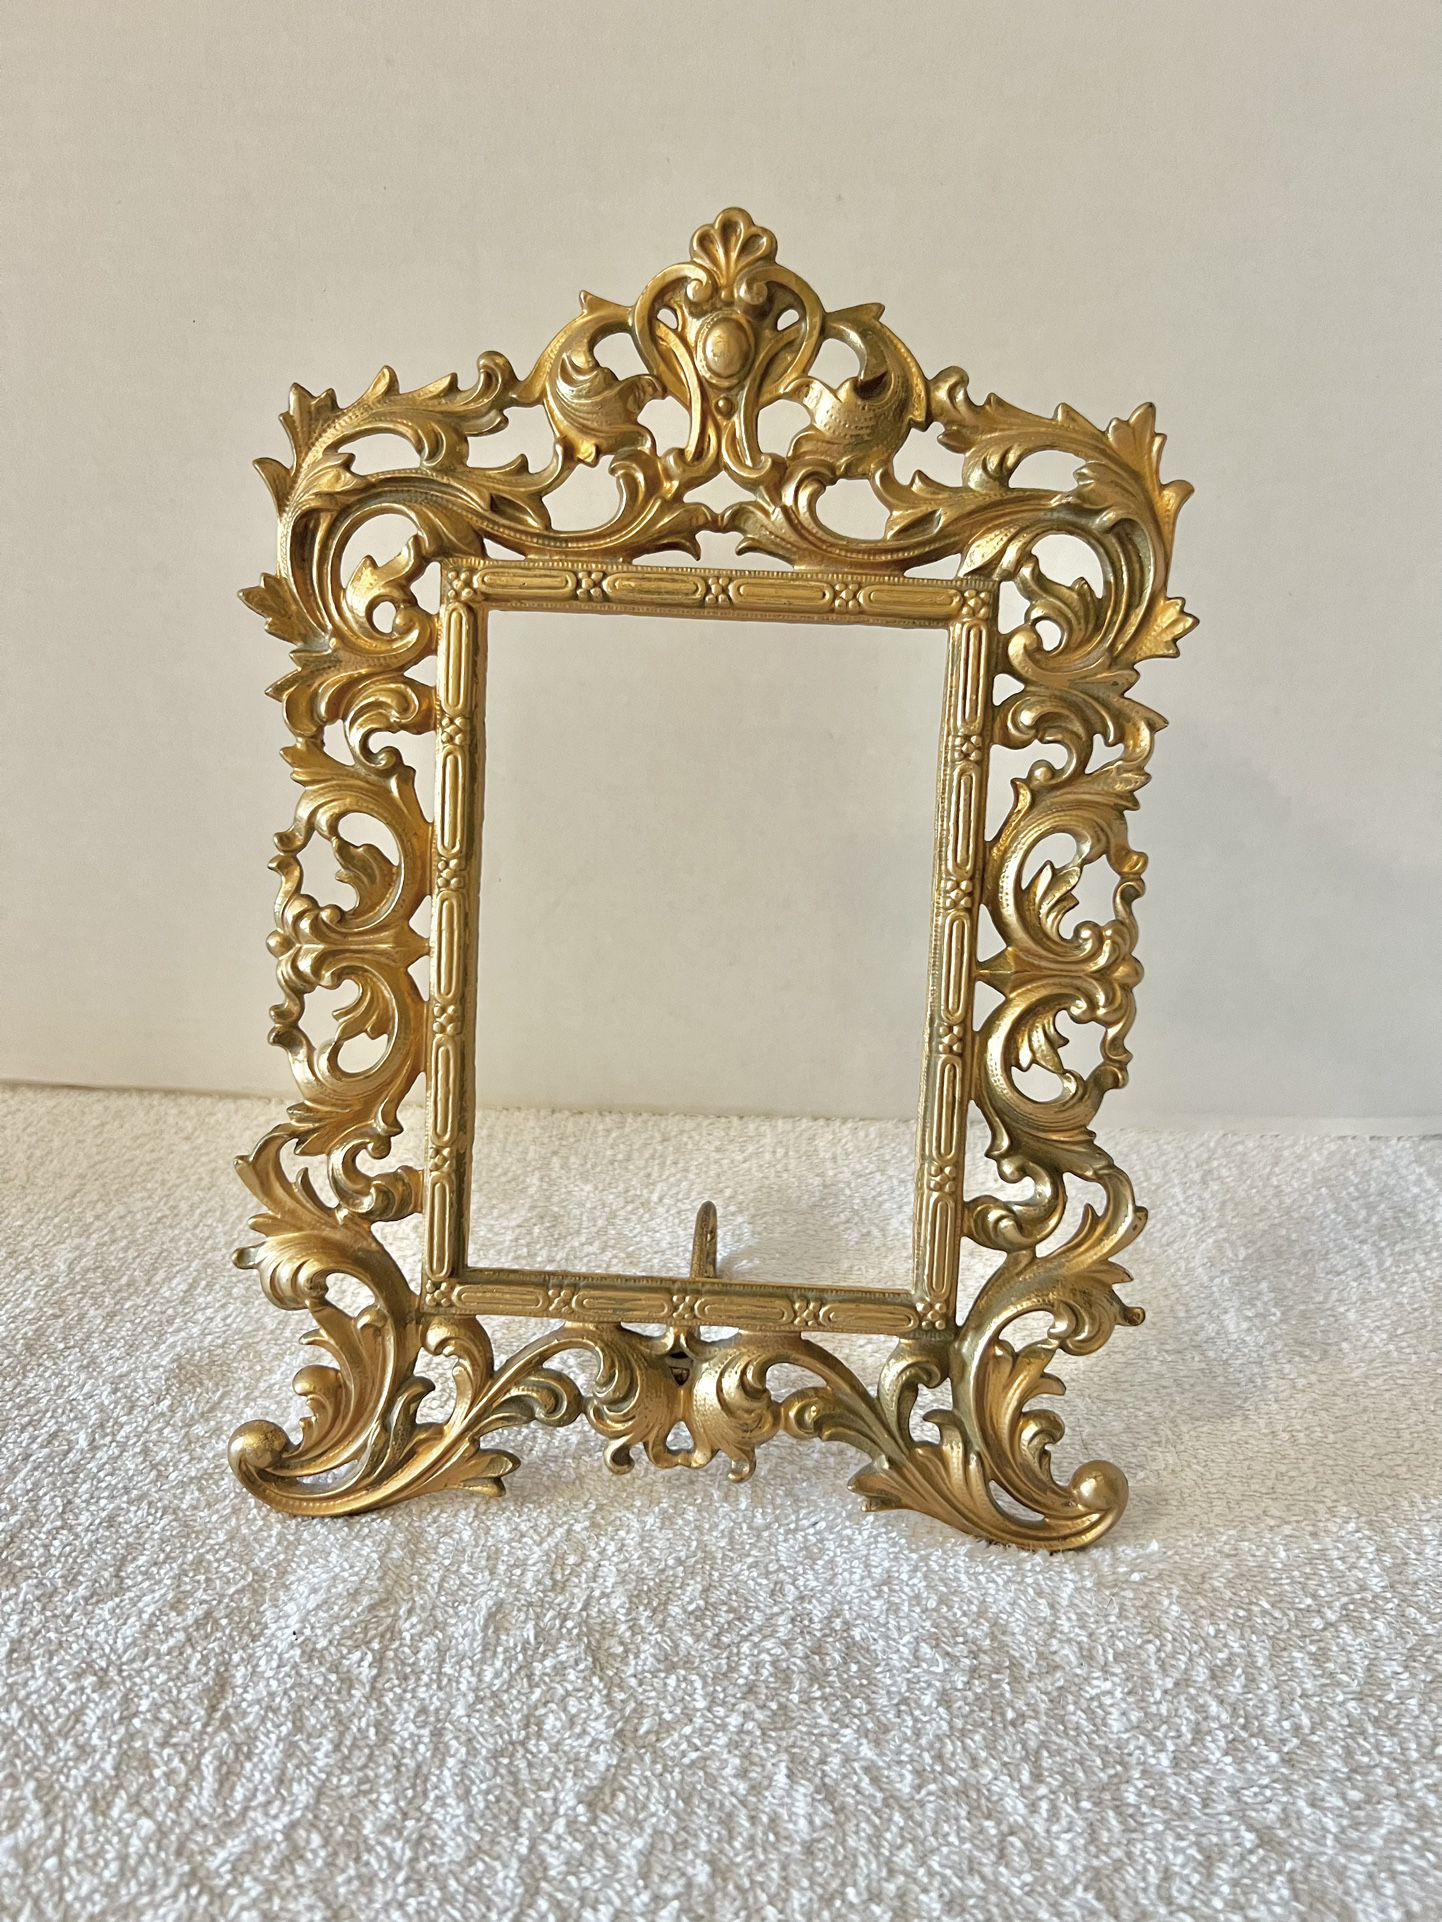 Antique Gold Finish Rococo Easel Style Dresser / Table-Top Portrait or Mirror Frame/Marked